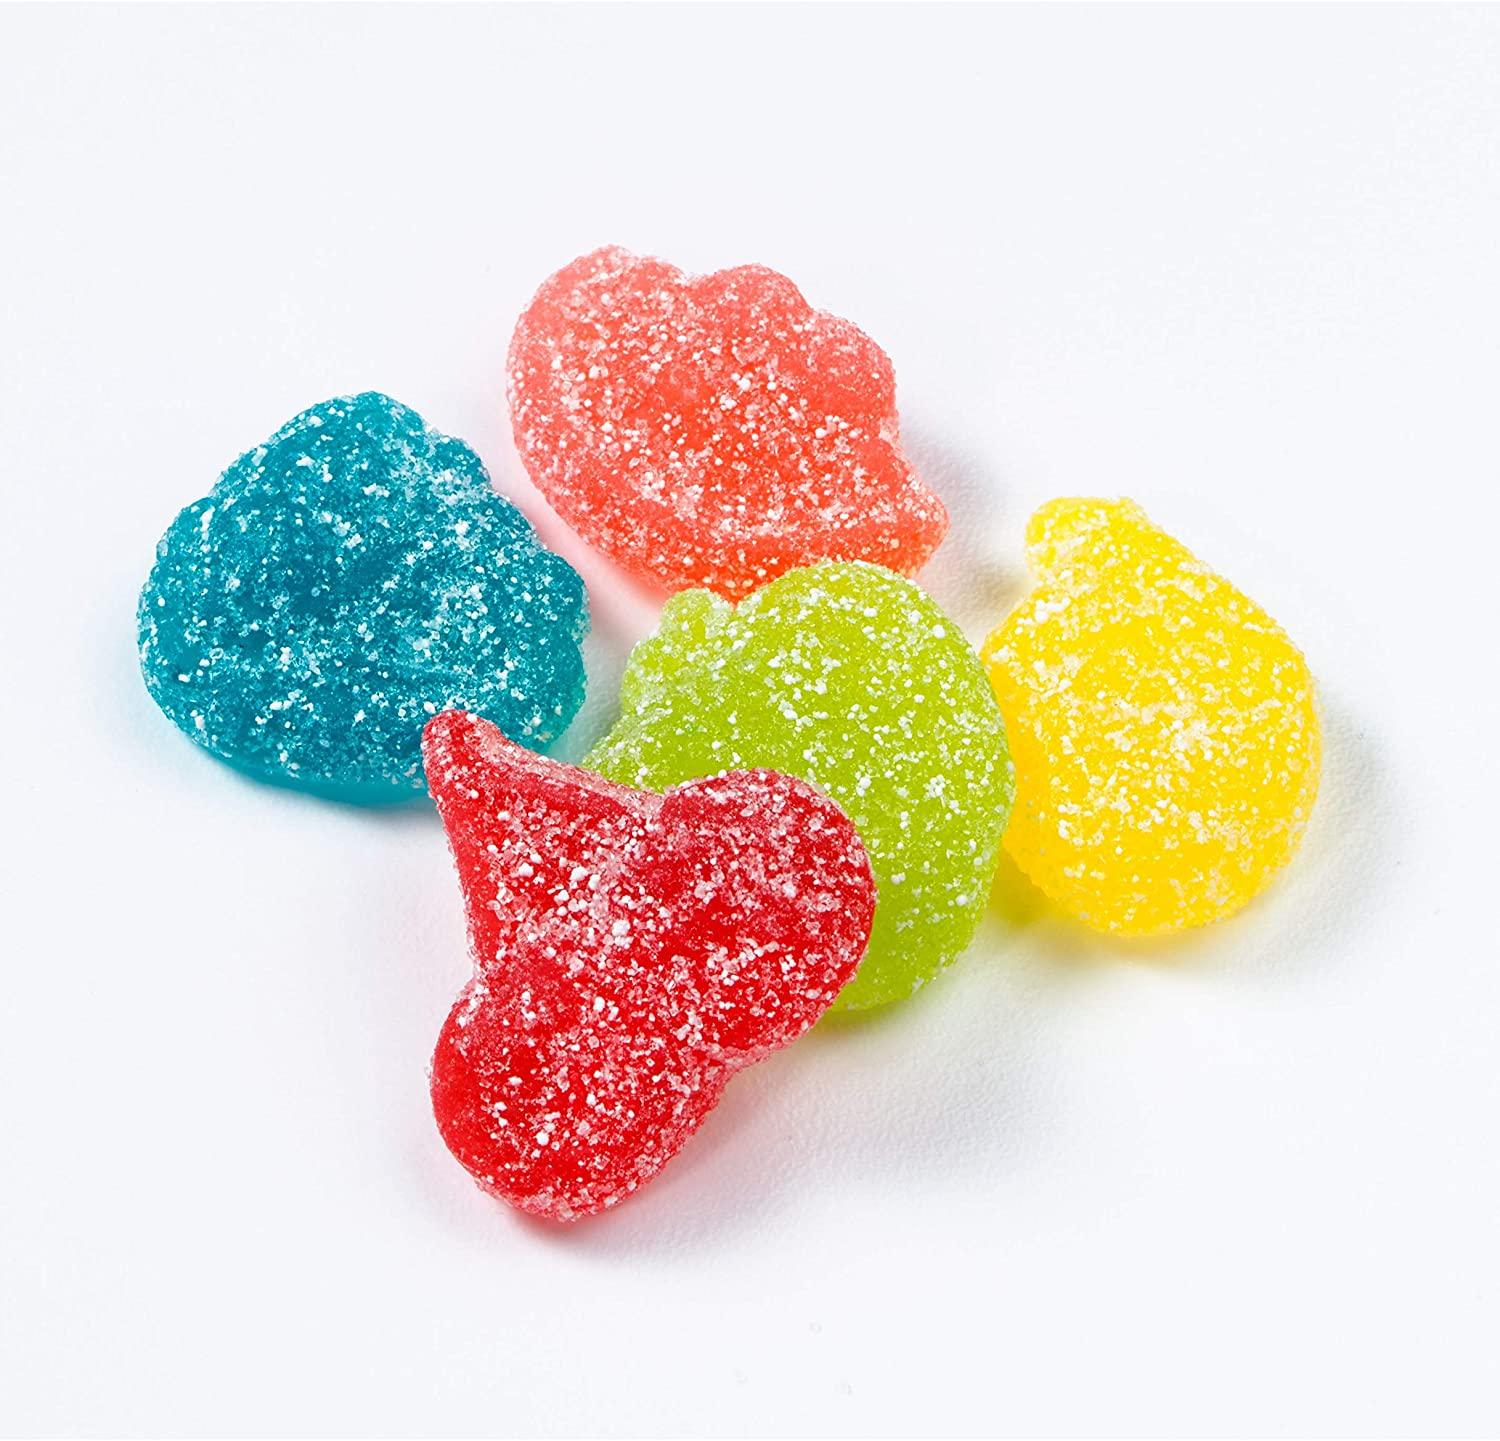 5Lbs Jolly Rancher Gummies Candy for $10.97 Shipped